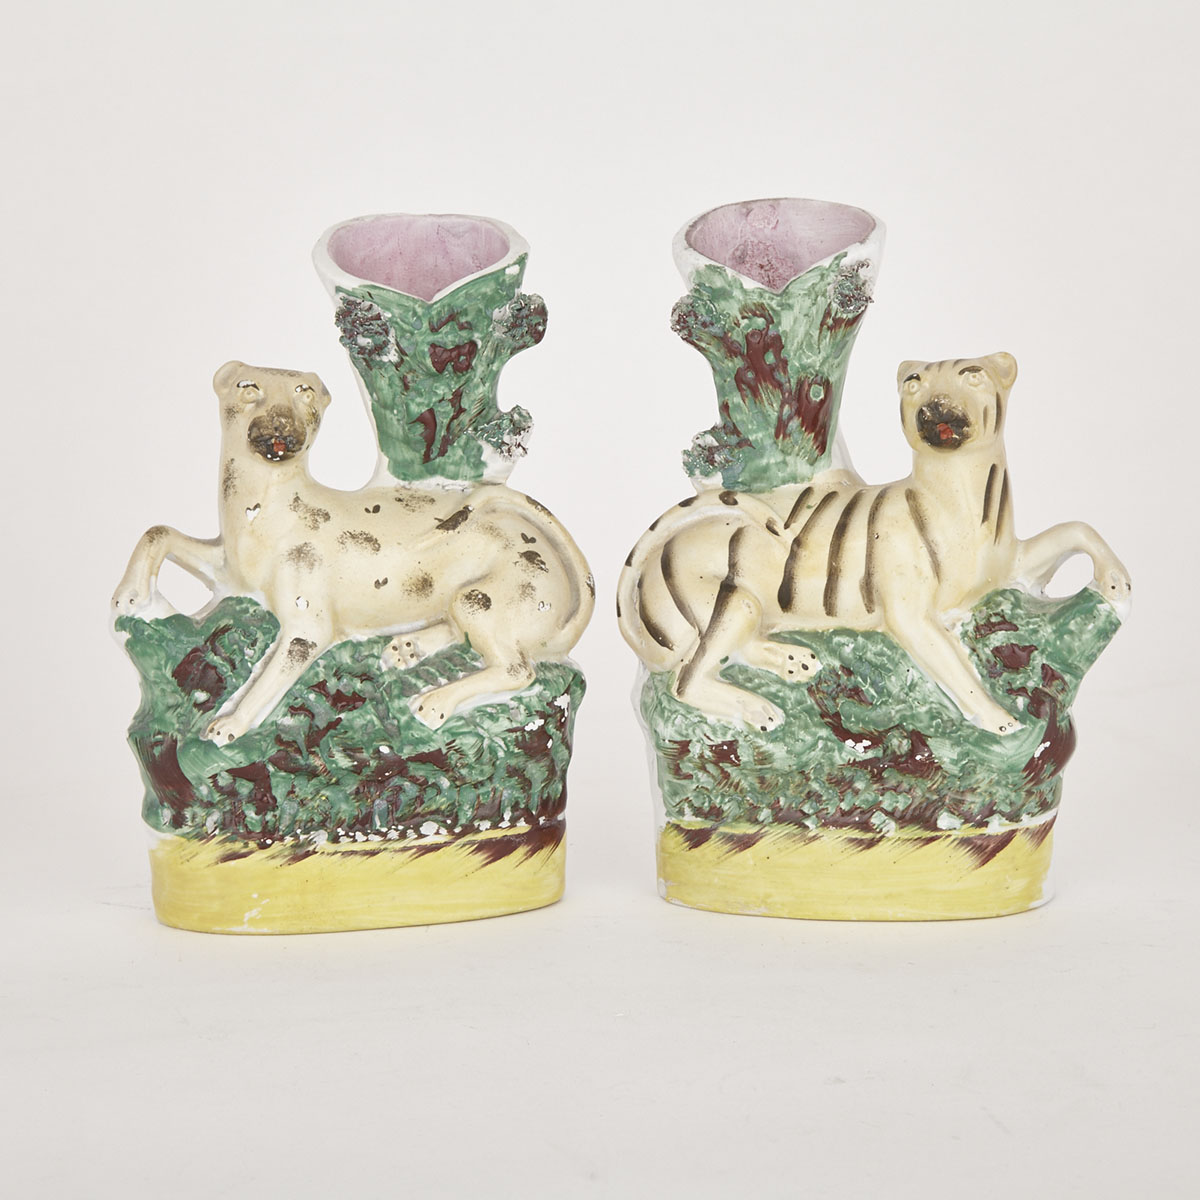 Pair of Staffordshire Leopard and Tiger Spill Vases, 19th century